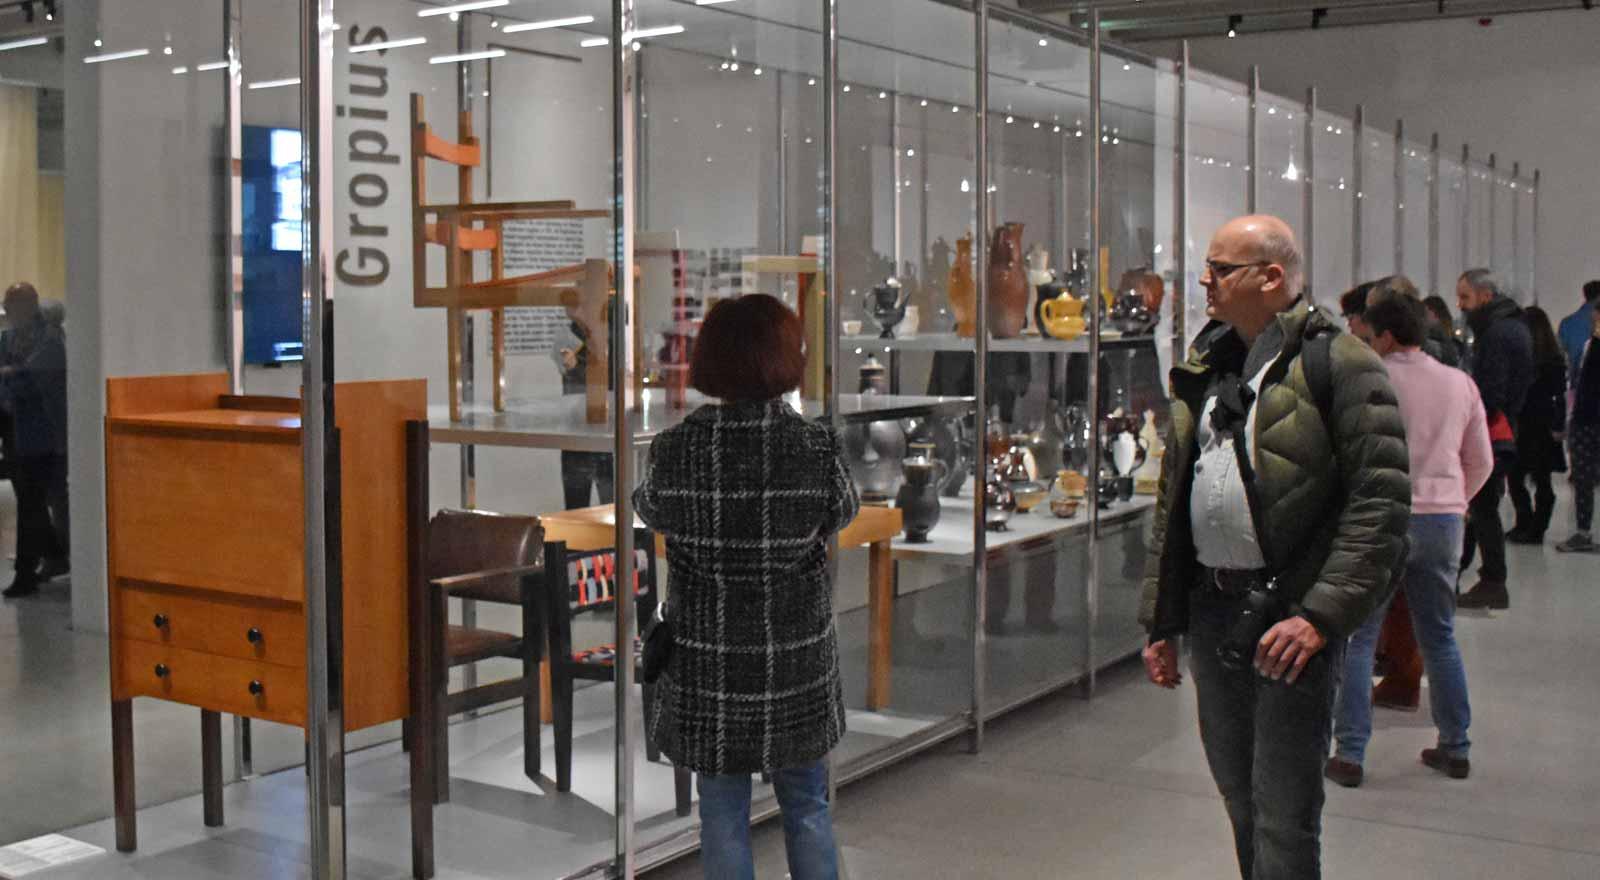 The Museum's first visitors explore the exhibits